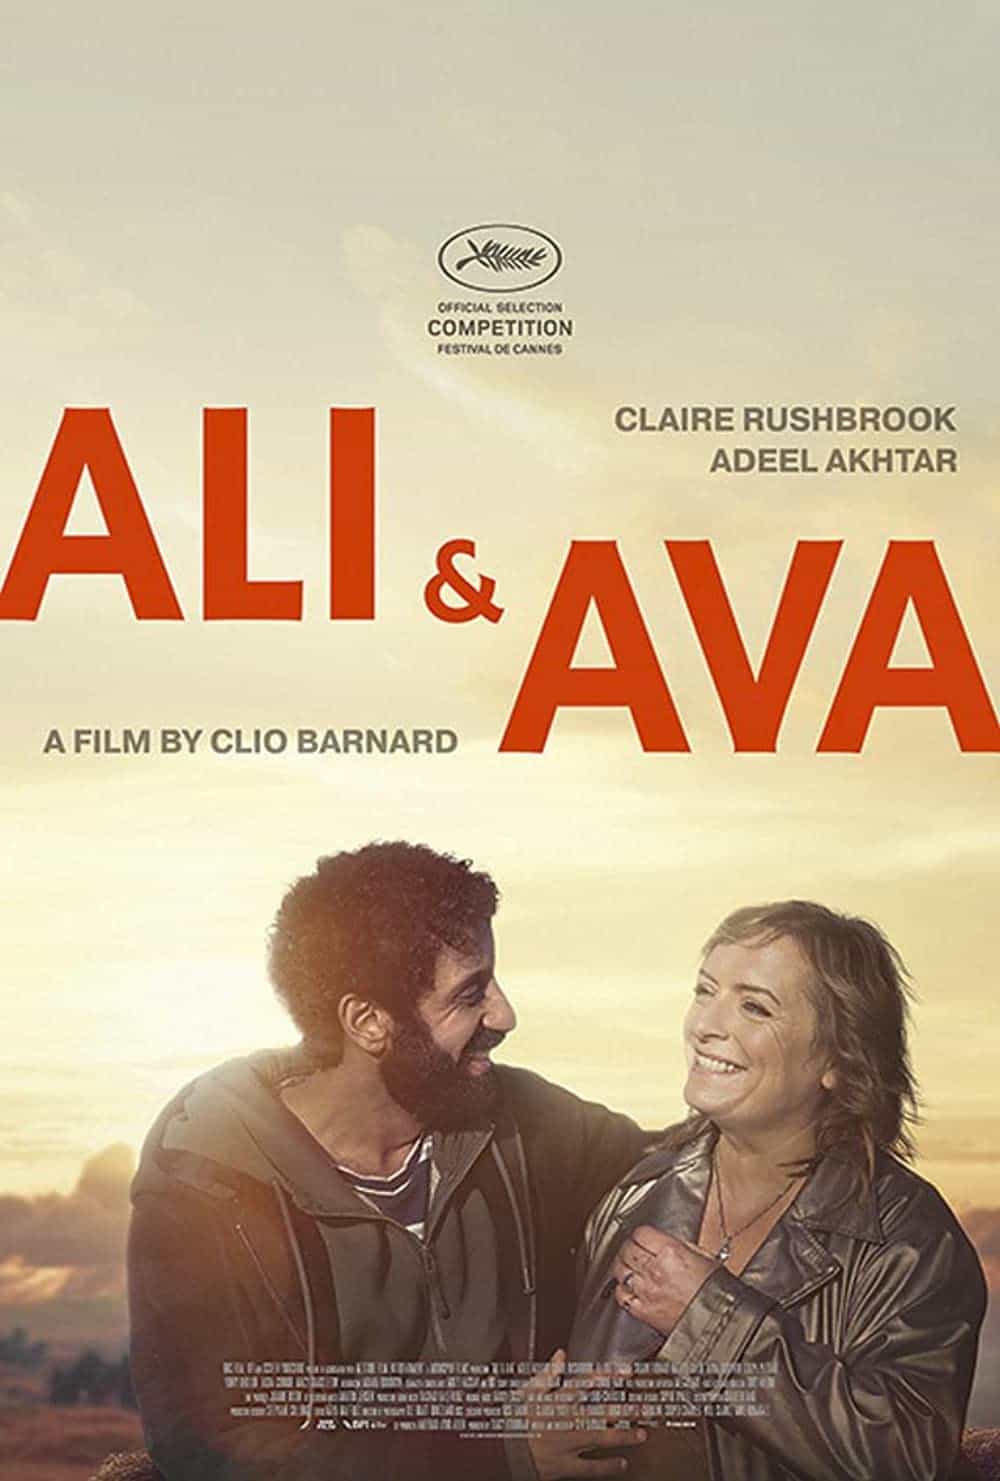 Ali and Ava is given a 15 age rating in the UK for strong language, domestic abuse